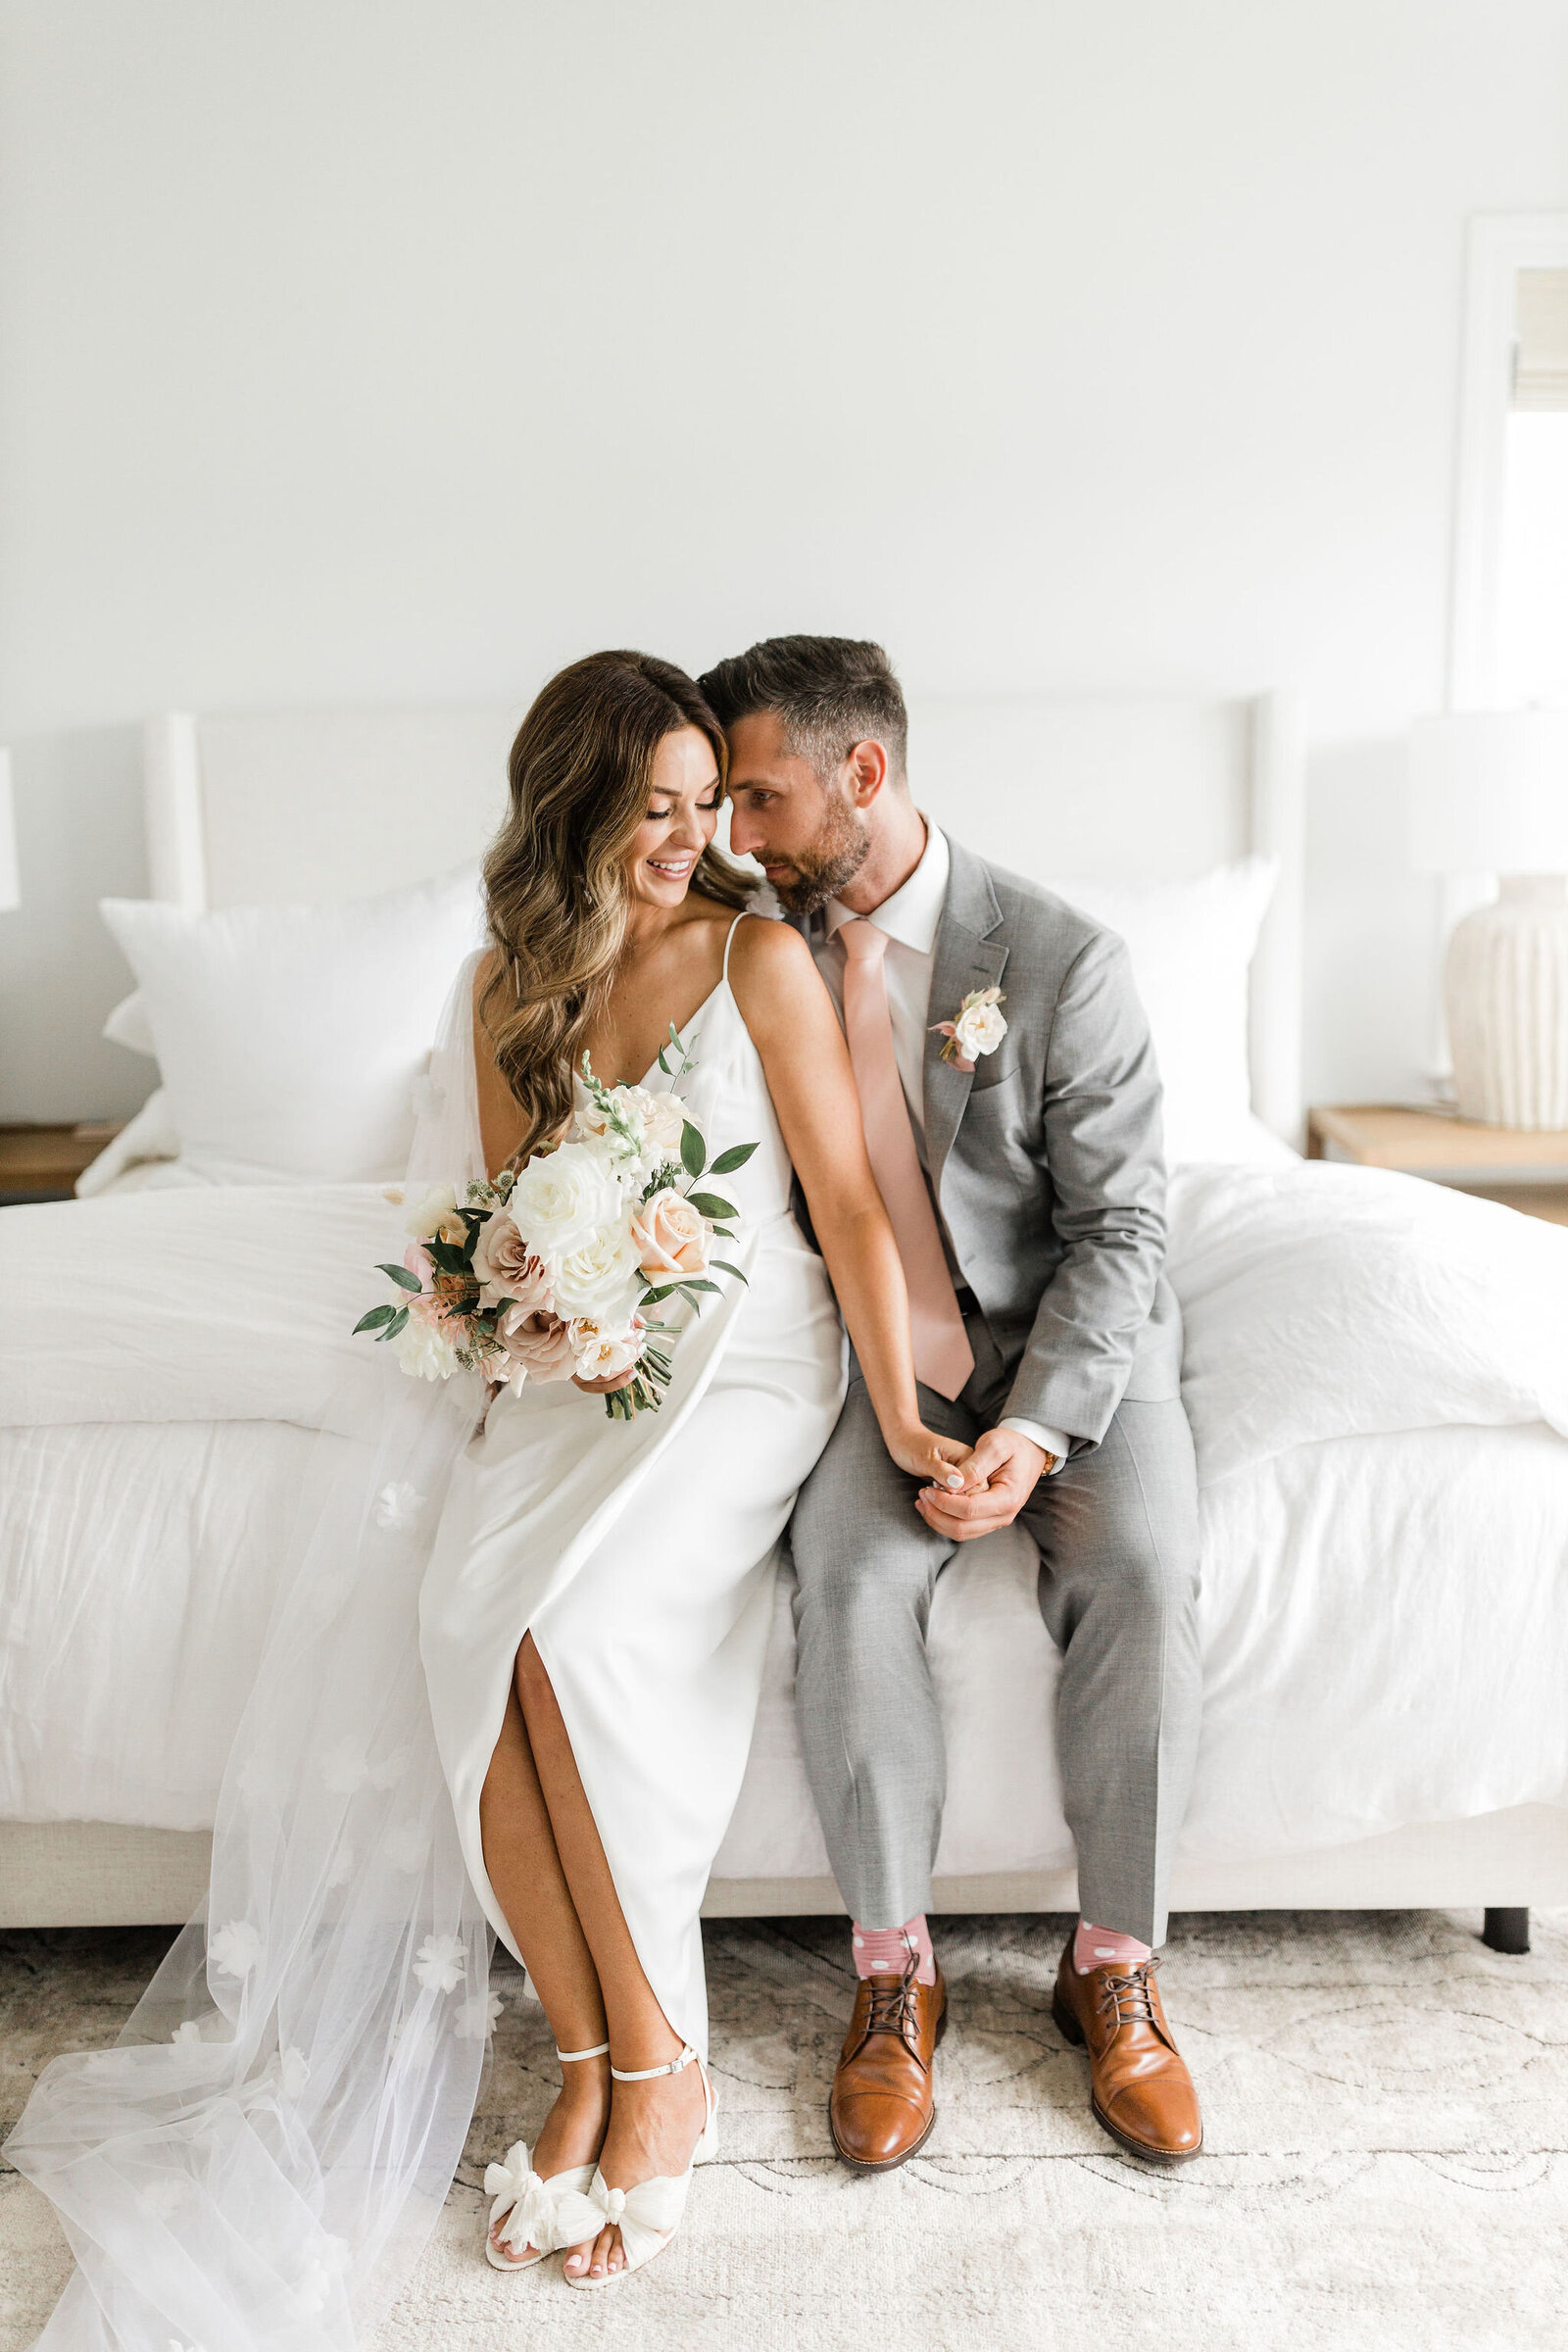 Romantic Couples Wedding Photo | Raleigh NC | The Axtells Photo and Film